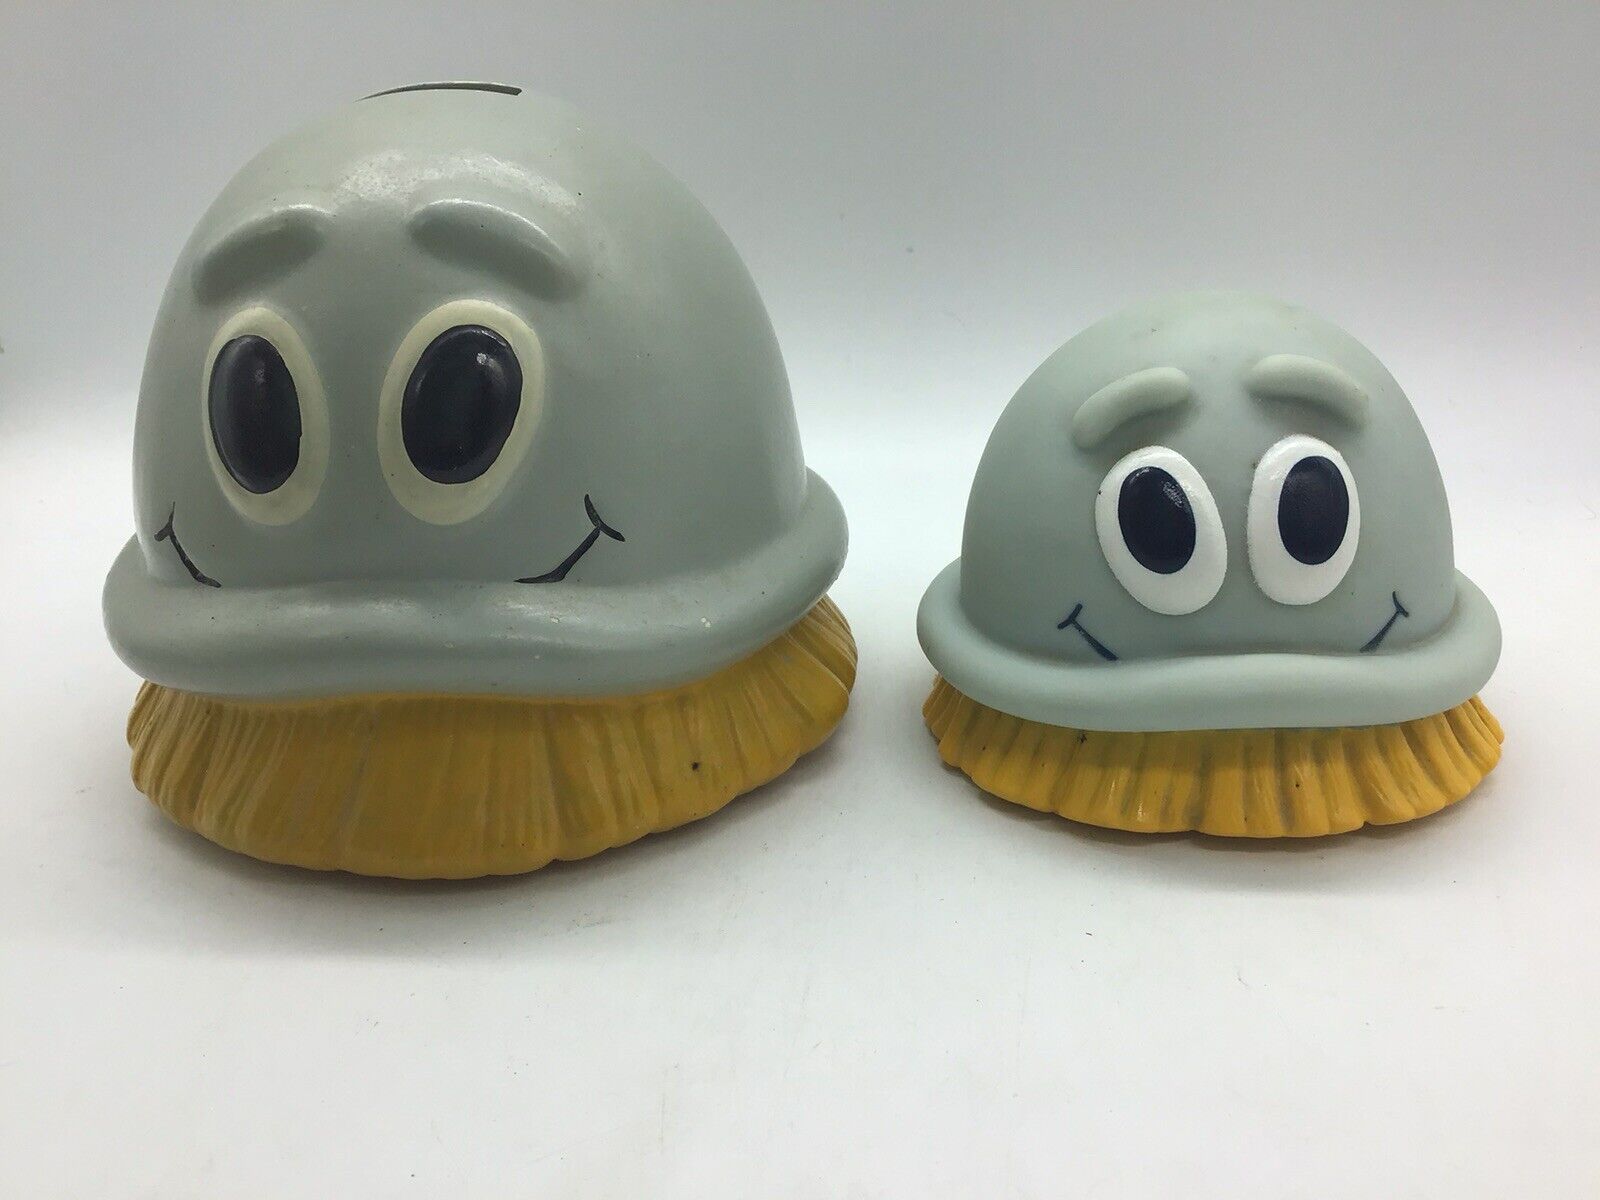 Vintage Dow Scrubbing Bubbles Bank And Squeeze Toy (1990)